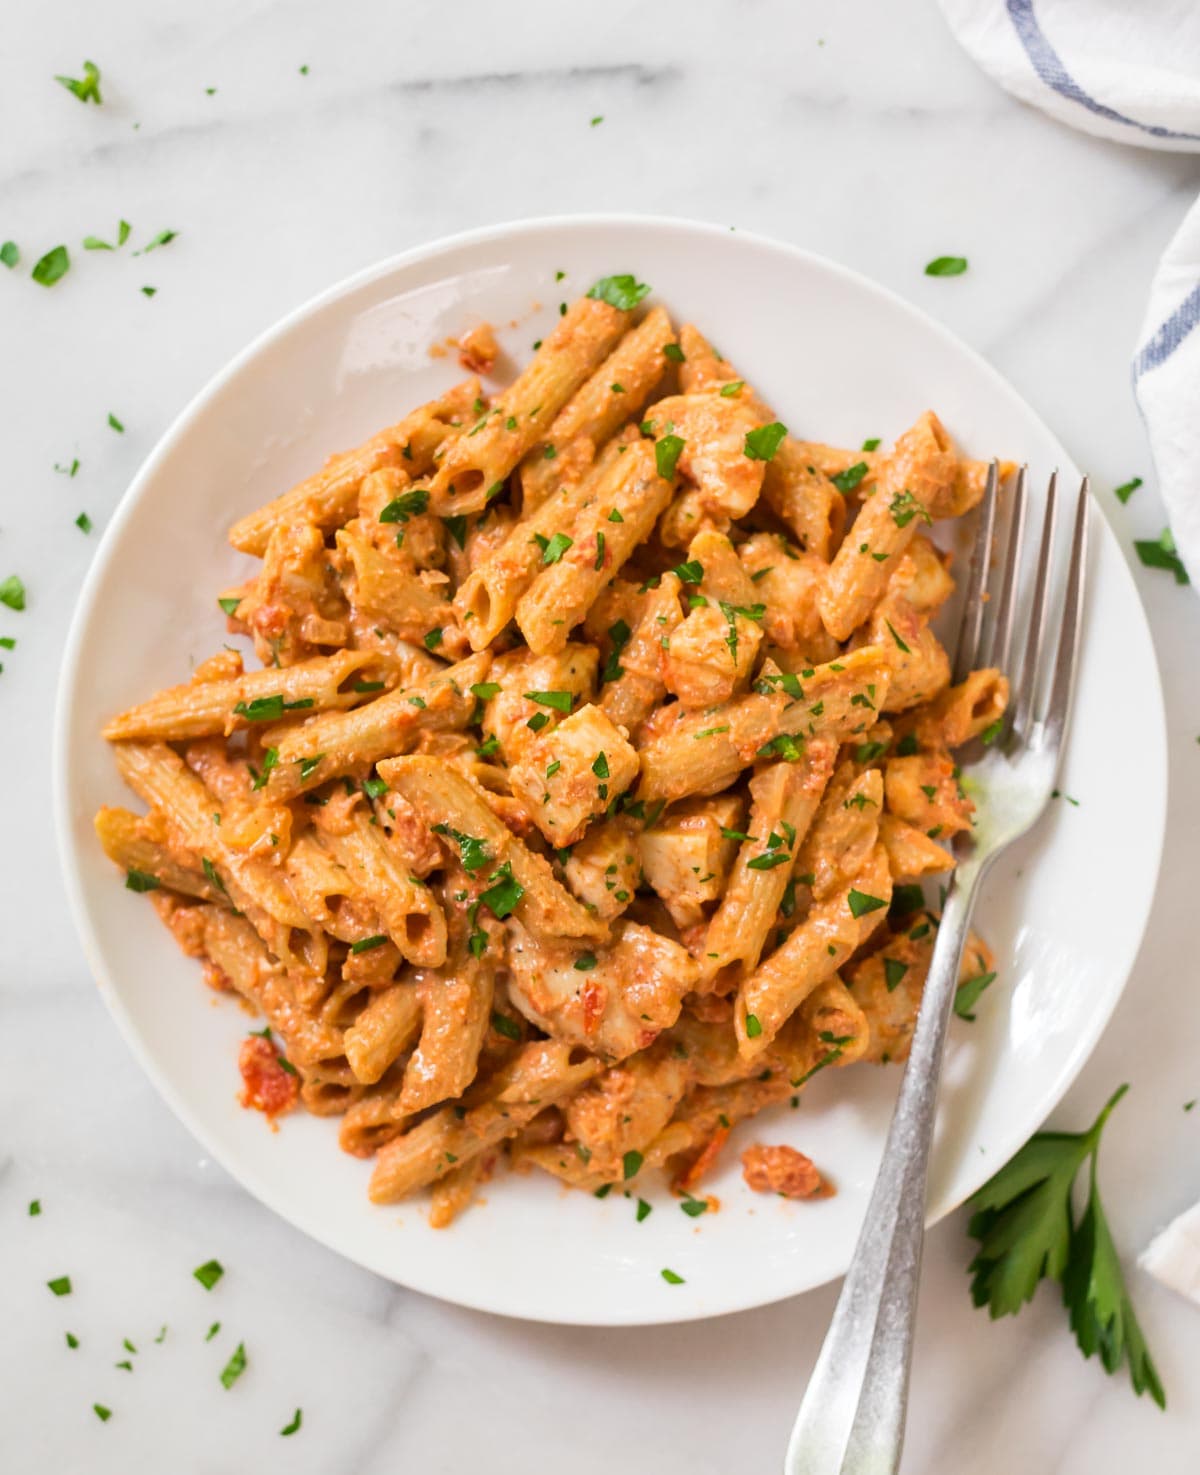 Plate full of penne alla vodka with chicken garnished with parsley